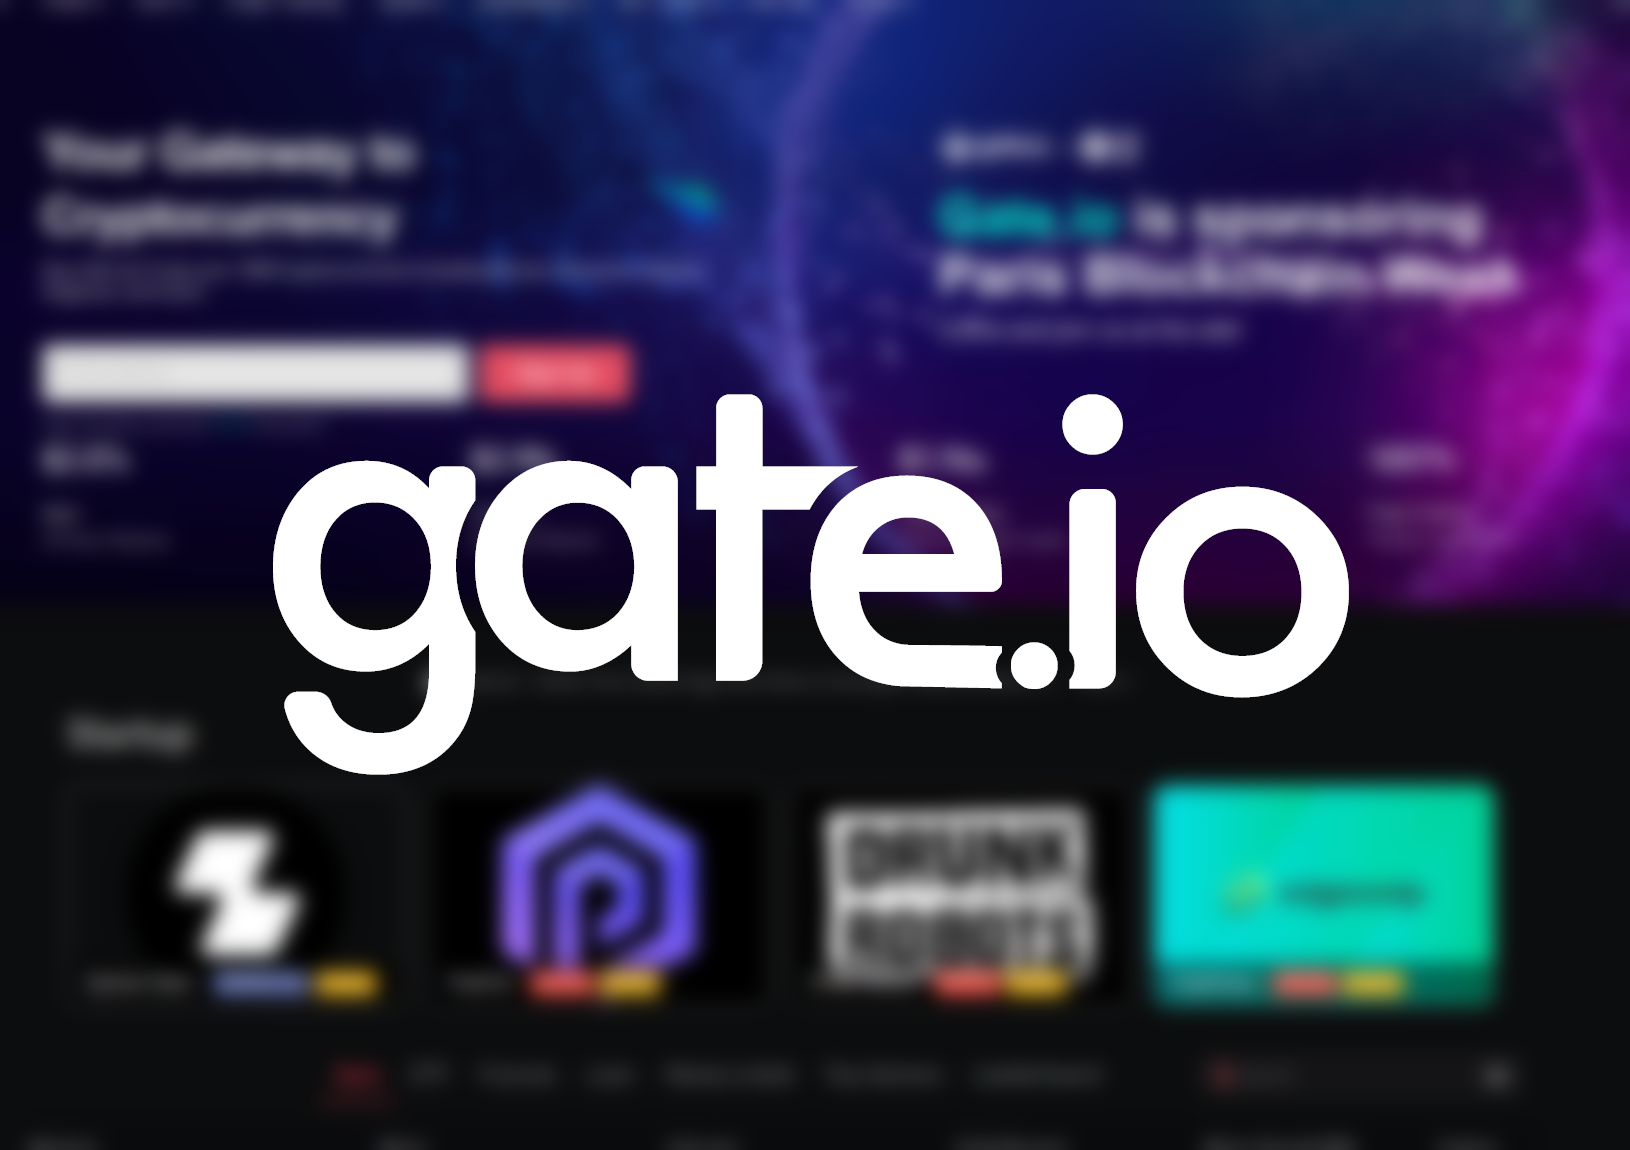 Gateio Review Massive Selection of Supported Coins and Crypto Gate.io Review - Massive Selection of Supported Coins and Crypto Trading Features - CoinCheckup Blog